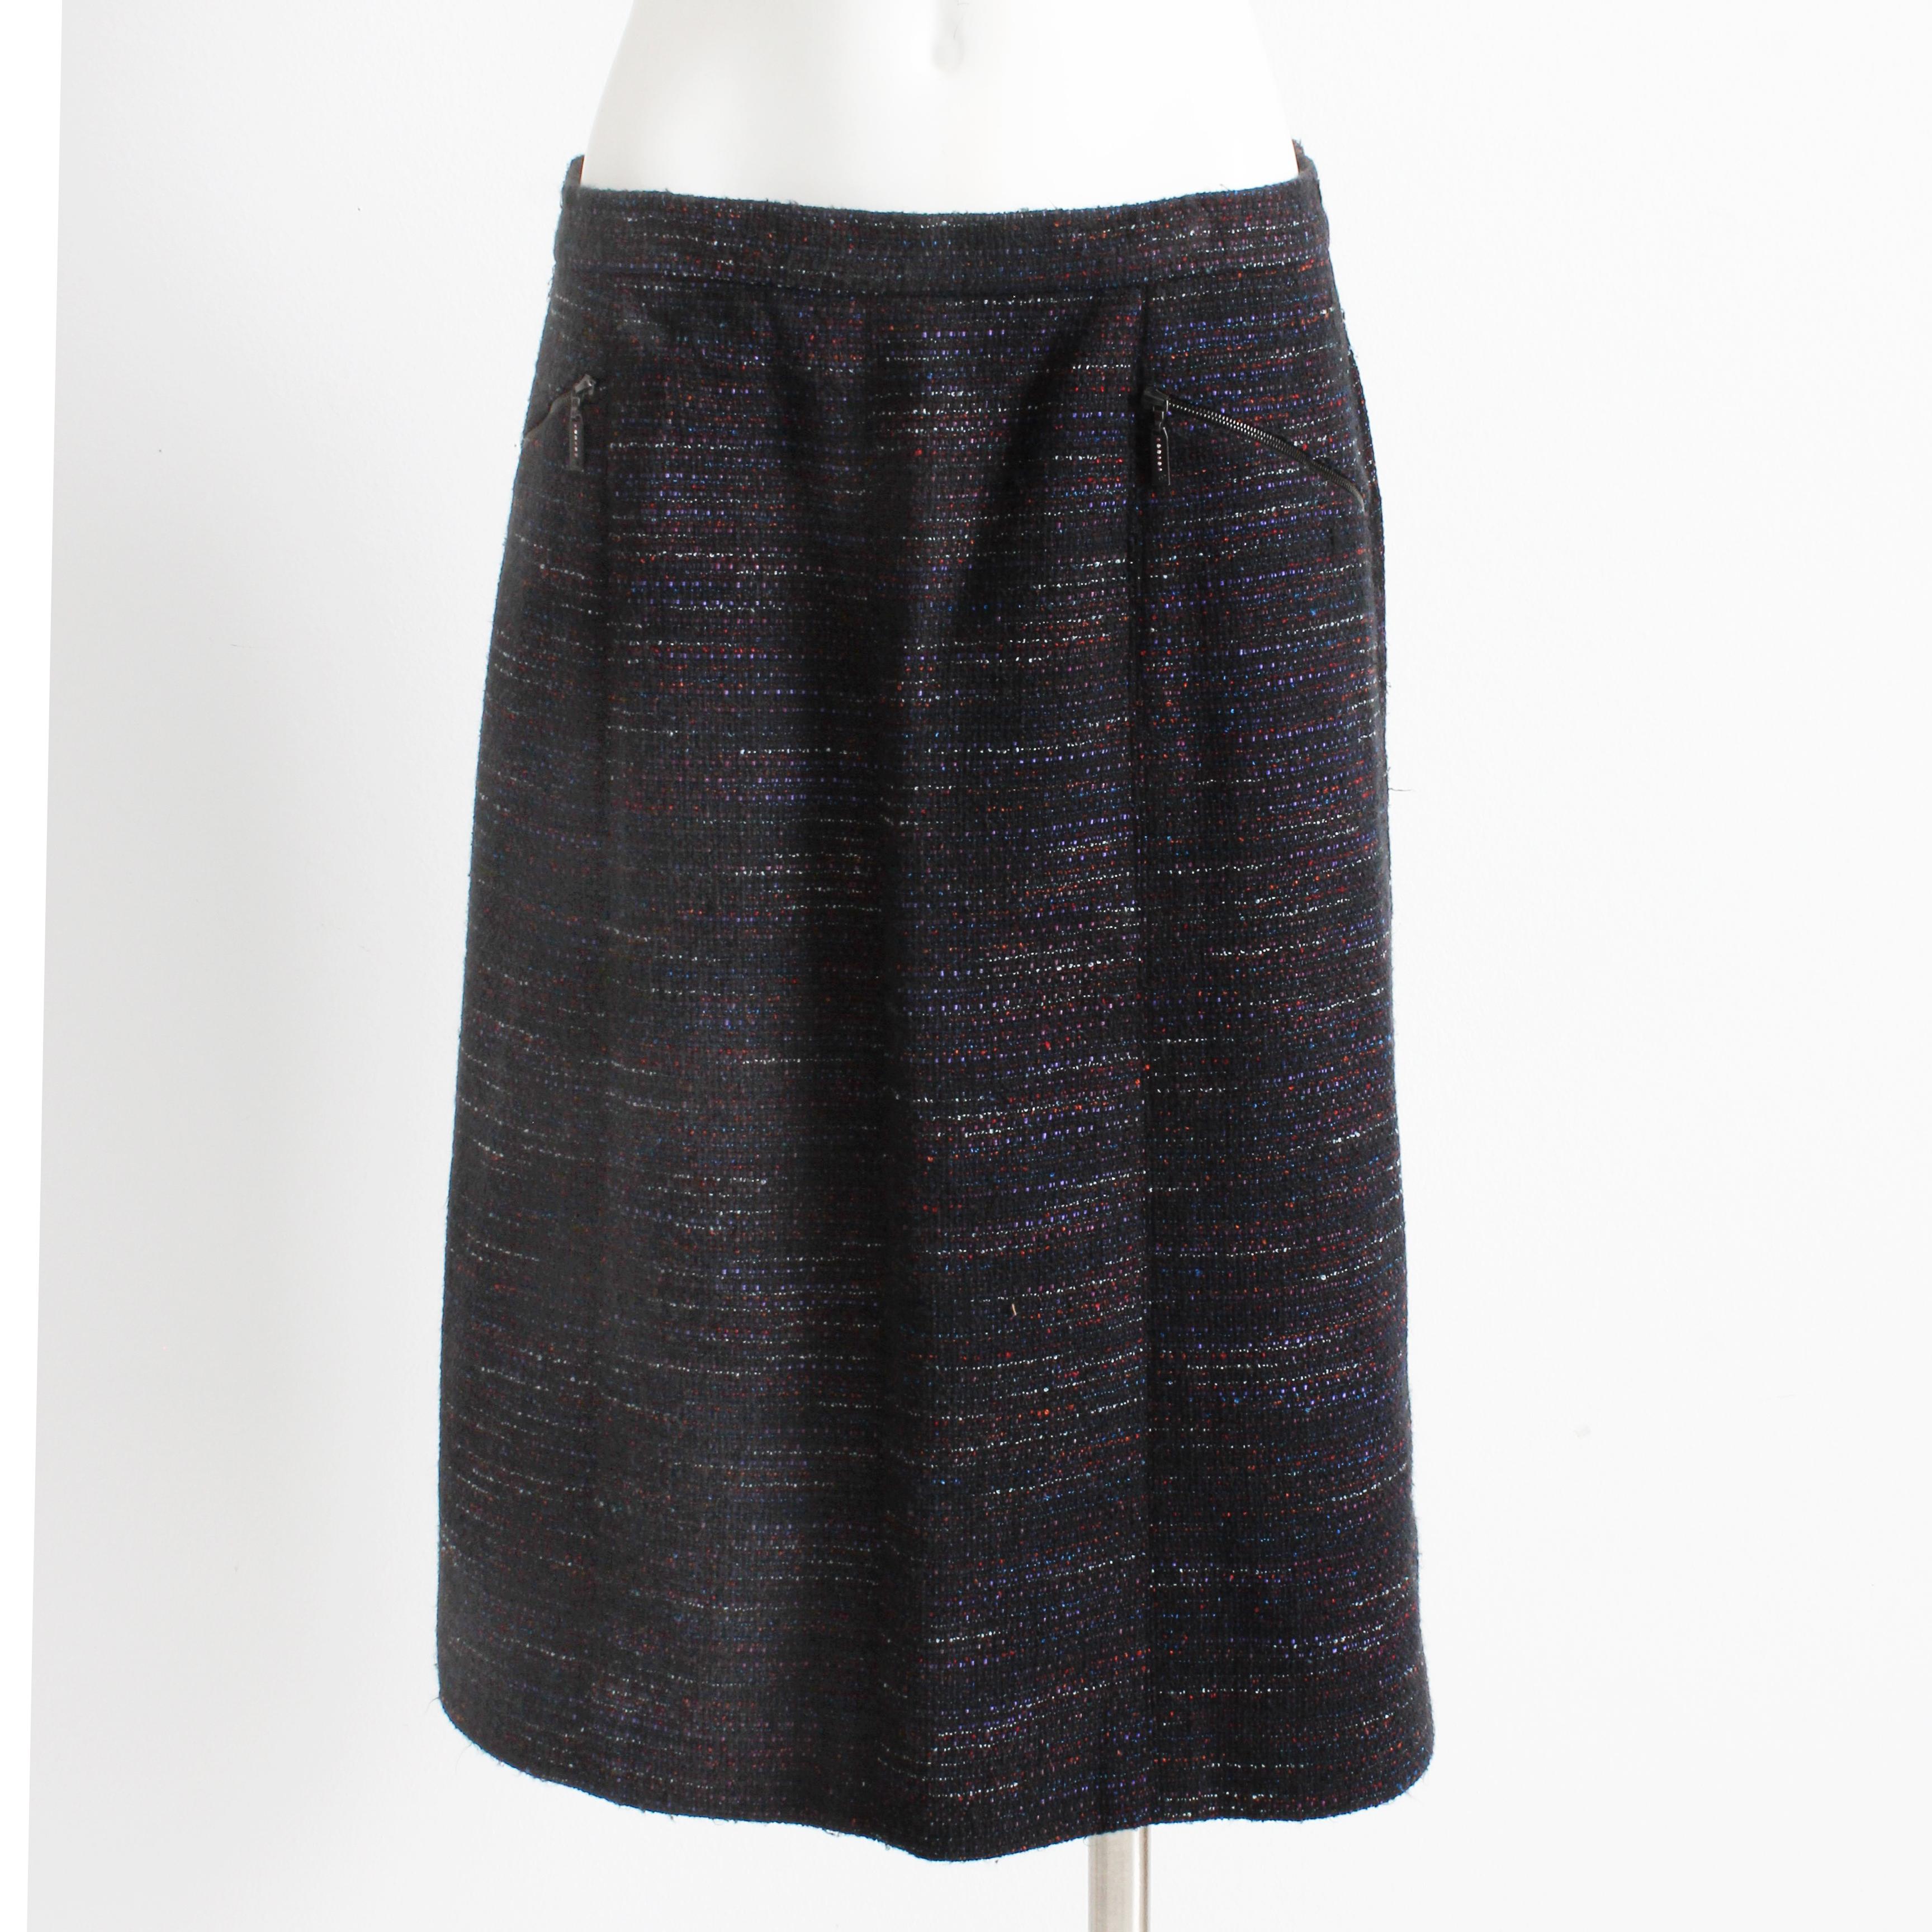 Chanel Skirt Multicolor Cotton Blend Tweed Pencil Style 02A Collection Size 40 In Good Condition For Sale In Port Saint Lucie, FL